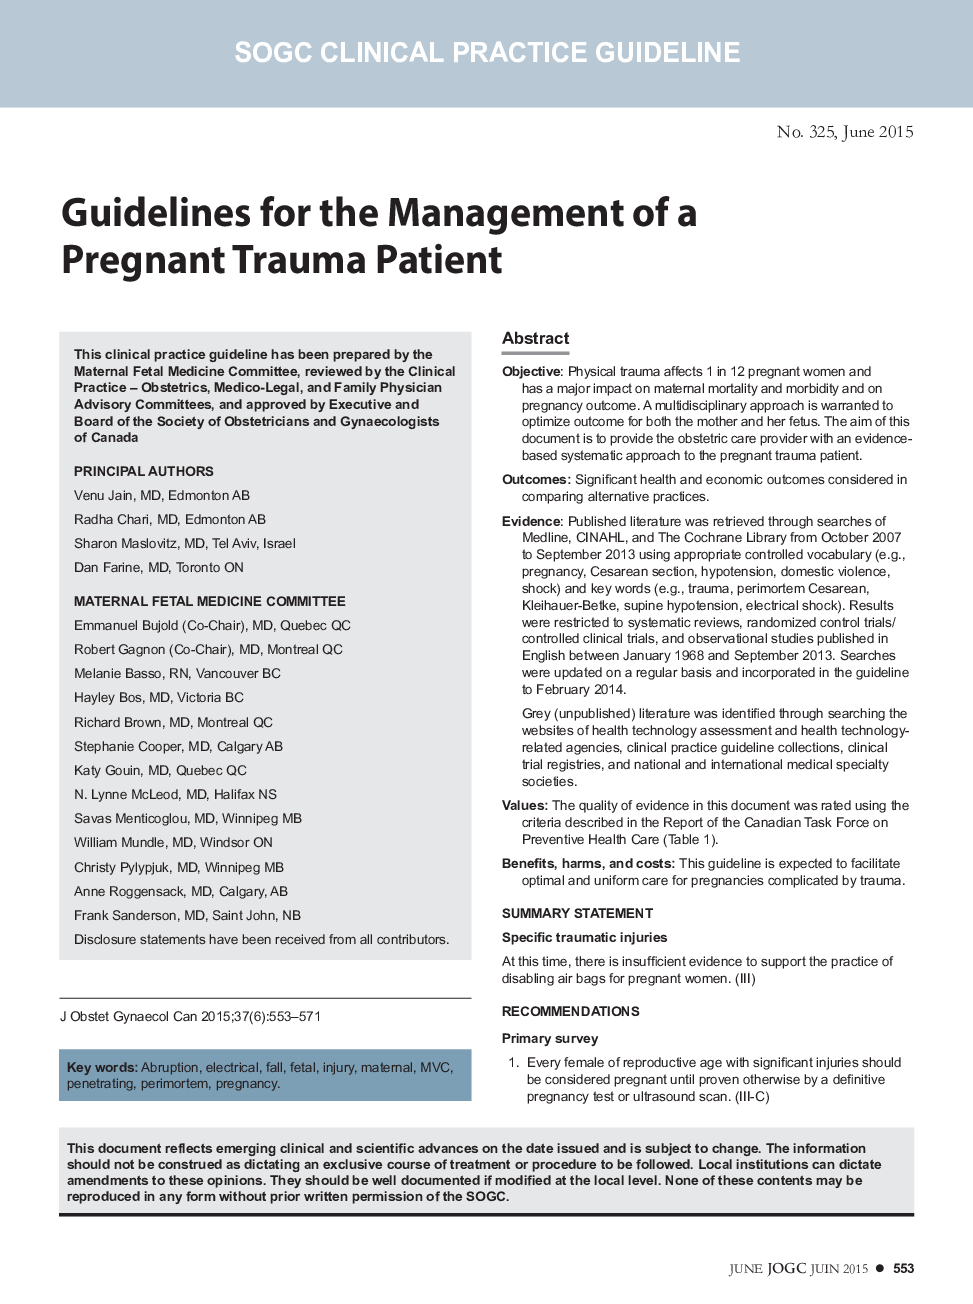 Guidelines for the Management of a Pregnant Trauma Patient